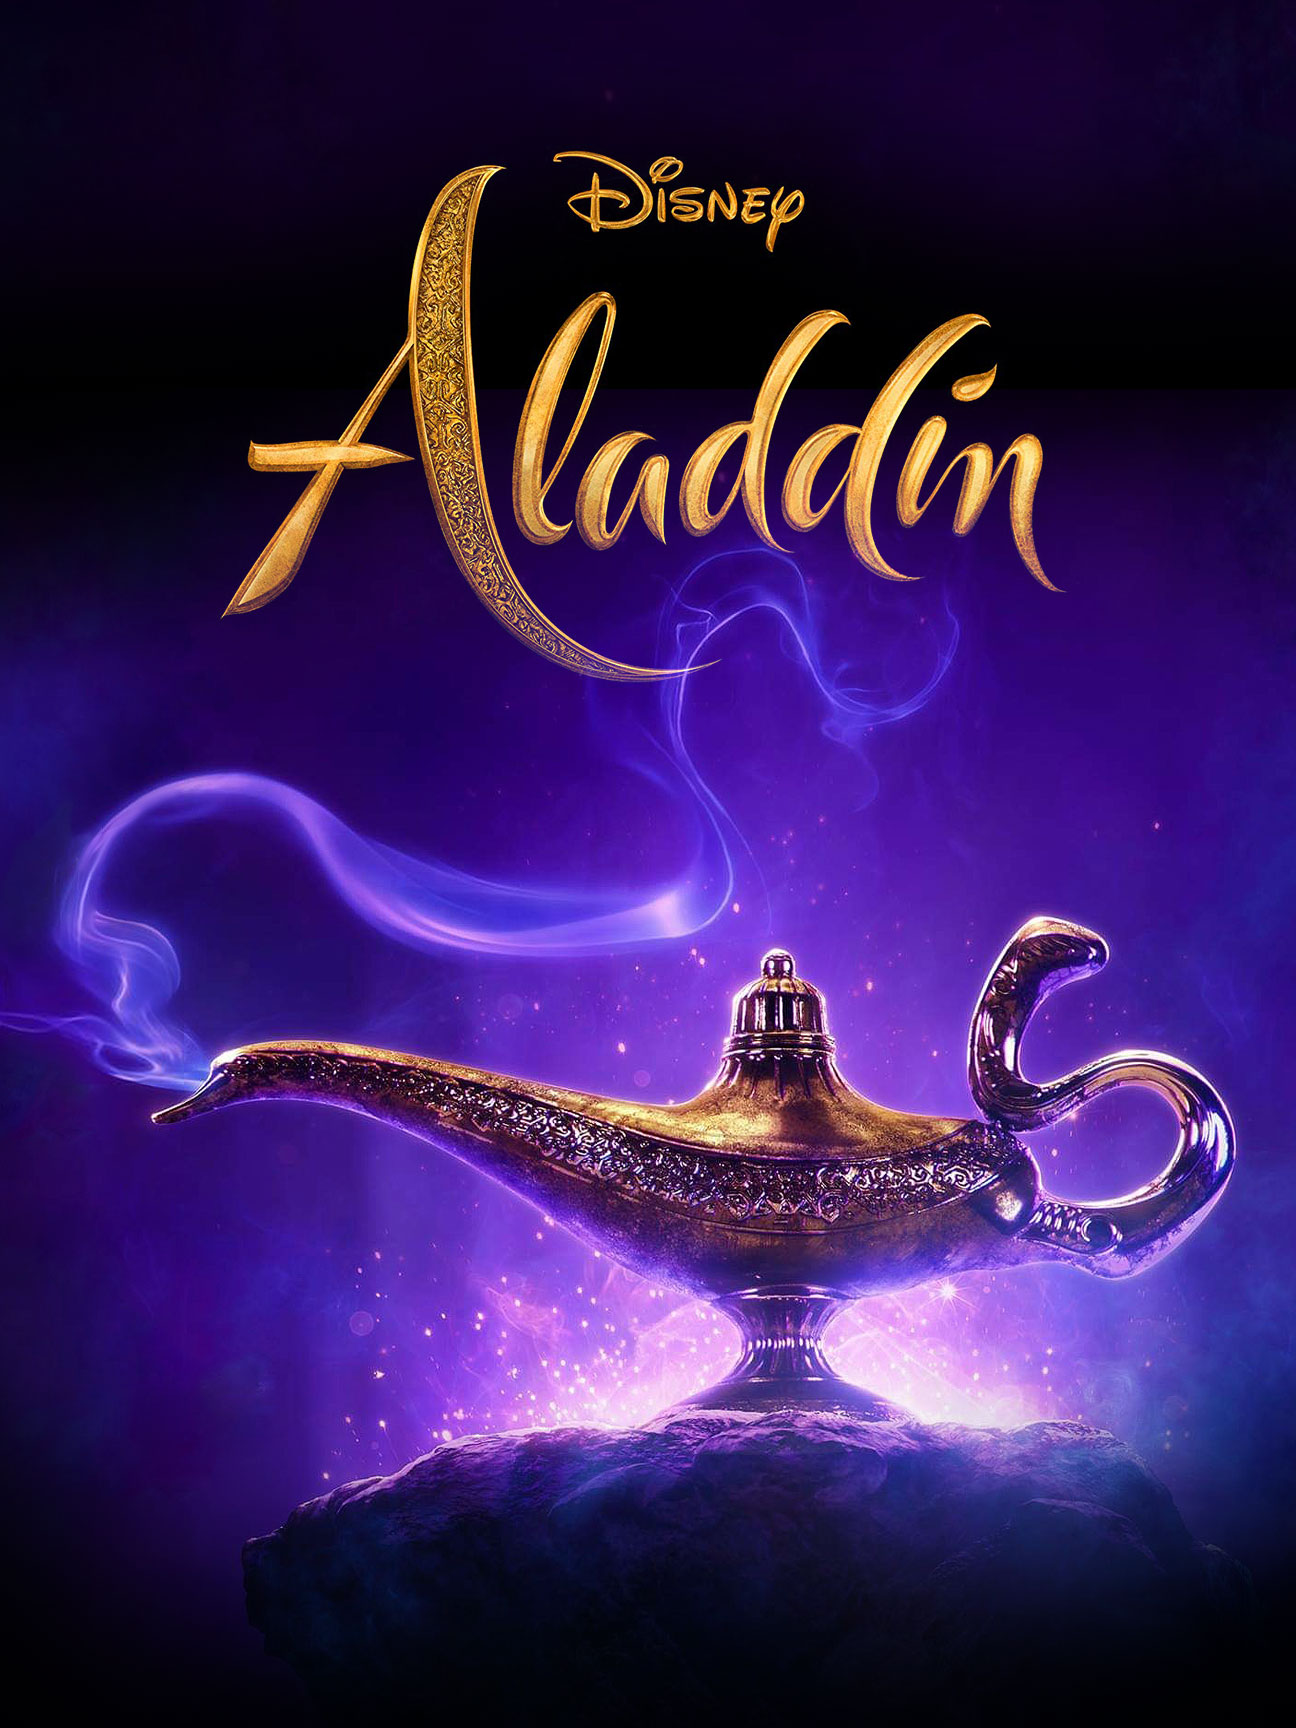 Aladdin Movie 2019 Wallpapers HD, Cast, Release Date ...